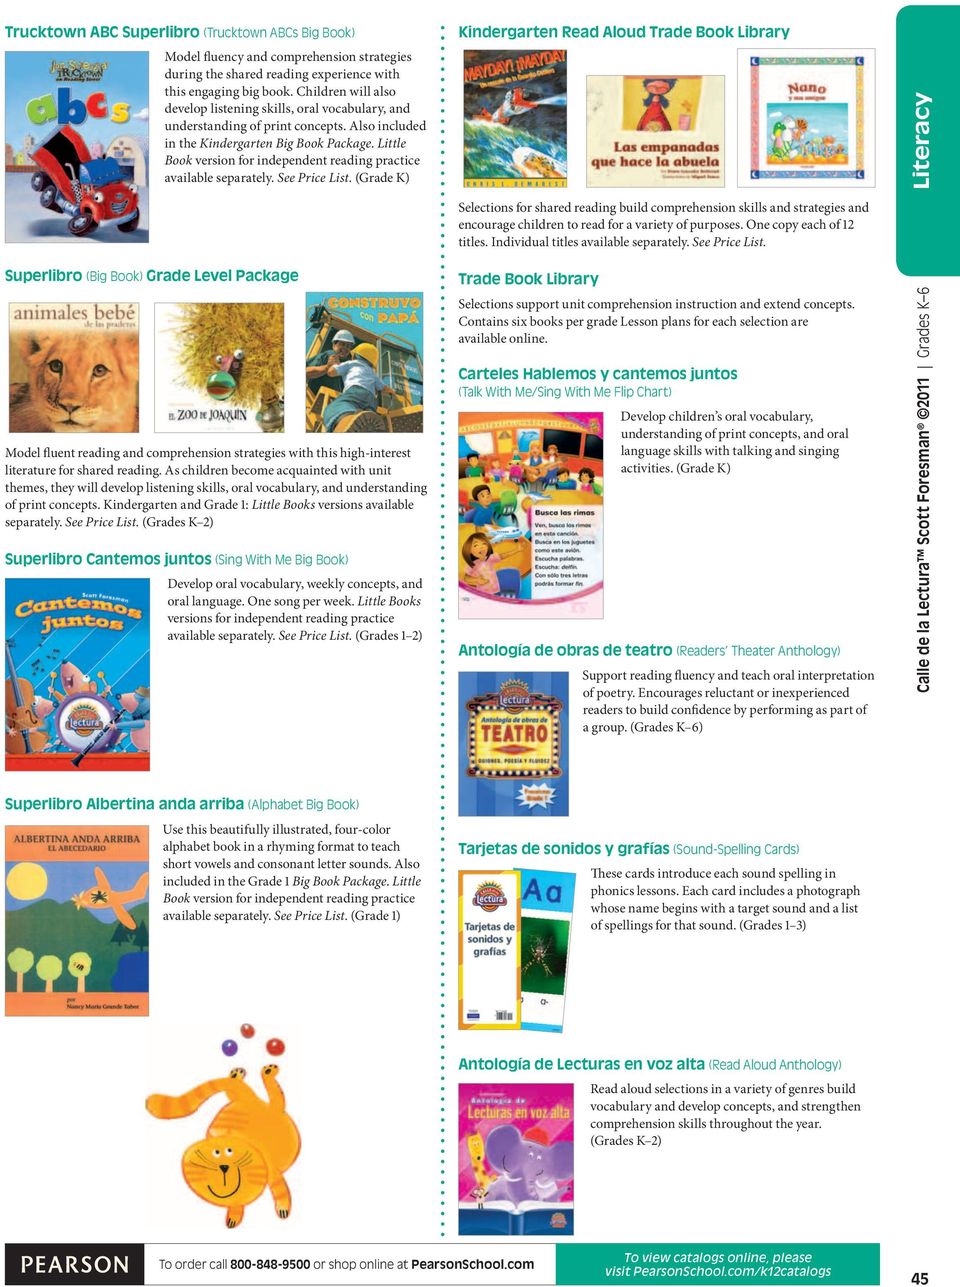 Little Book version for independent reading practice available separately. See Price List.